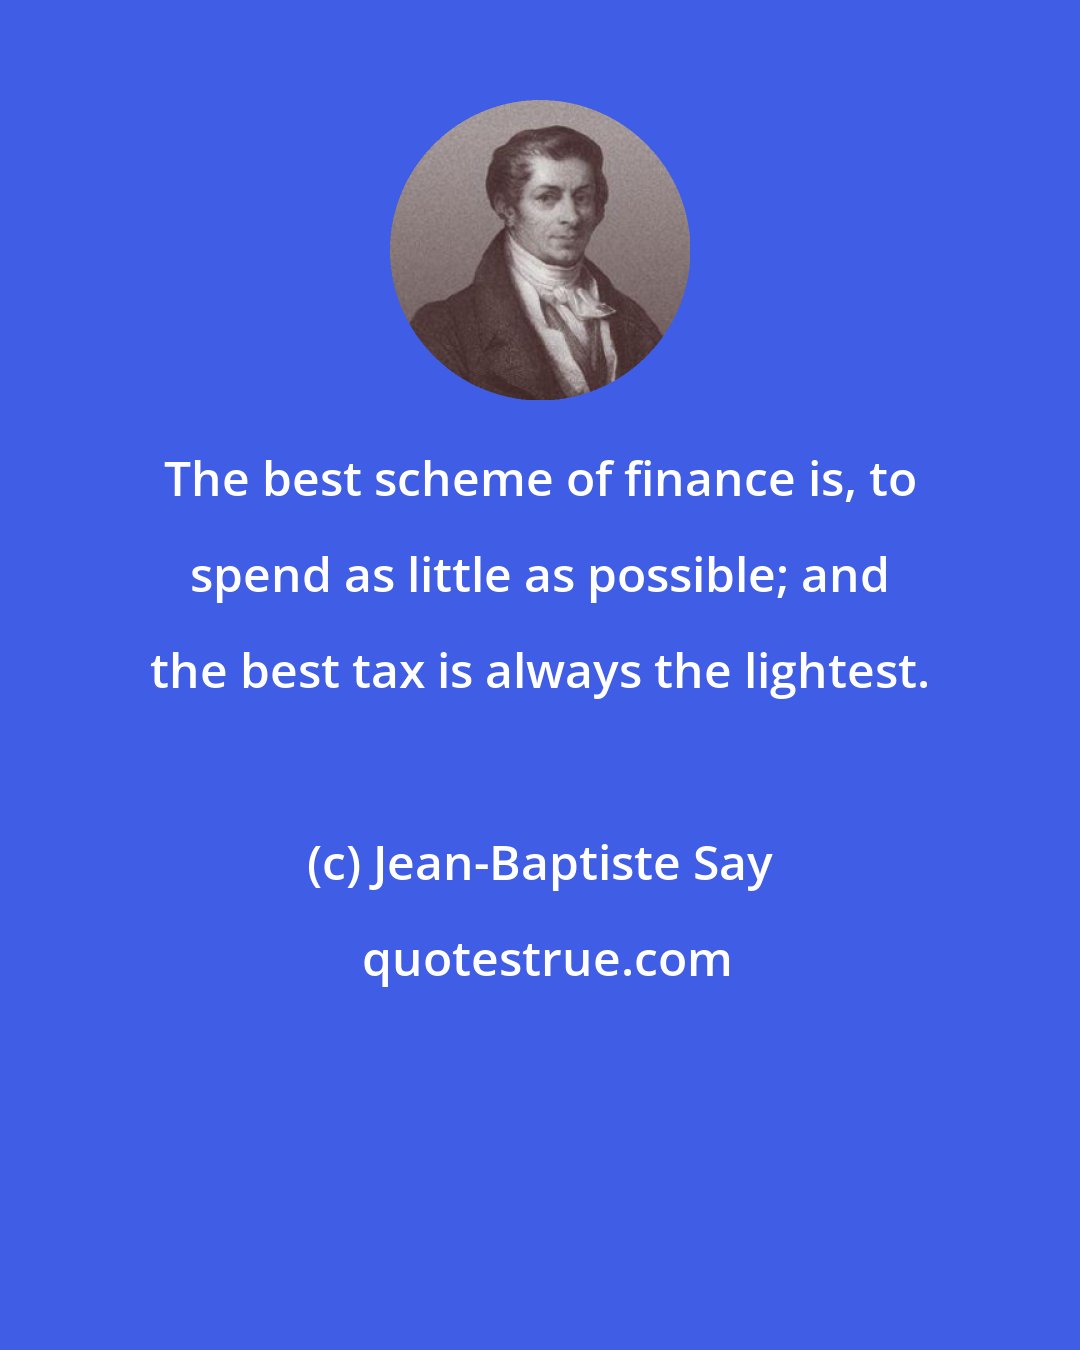 Jean-Baptiste Say: The best scheme of finance is, to spend as little as possible; and the best tax is always the lightest.